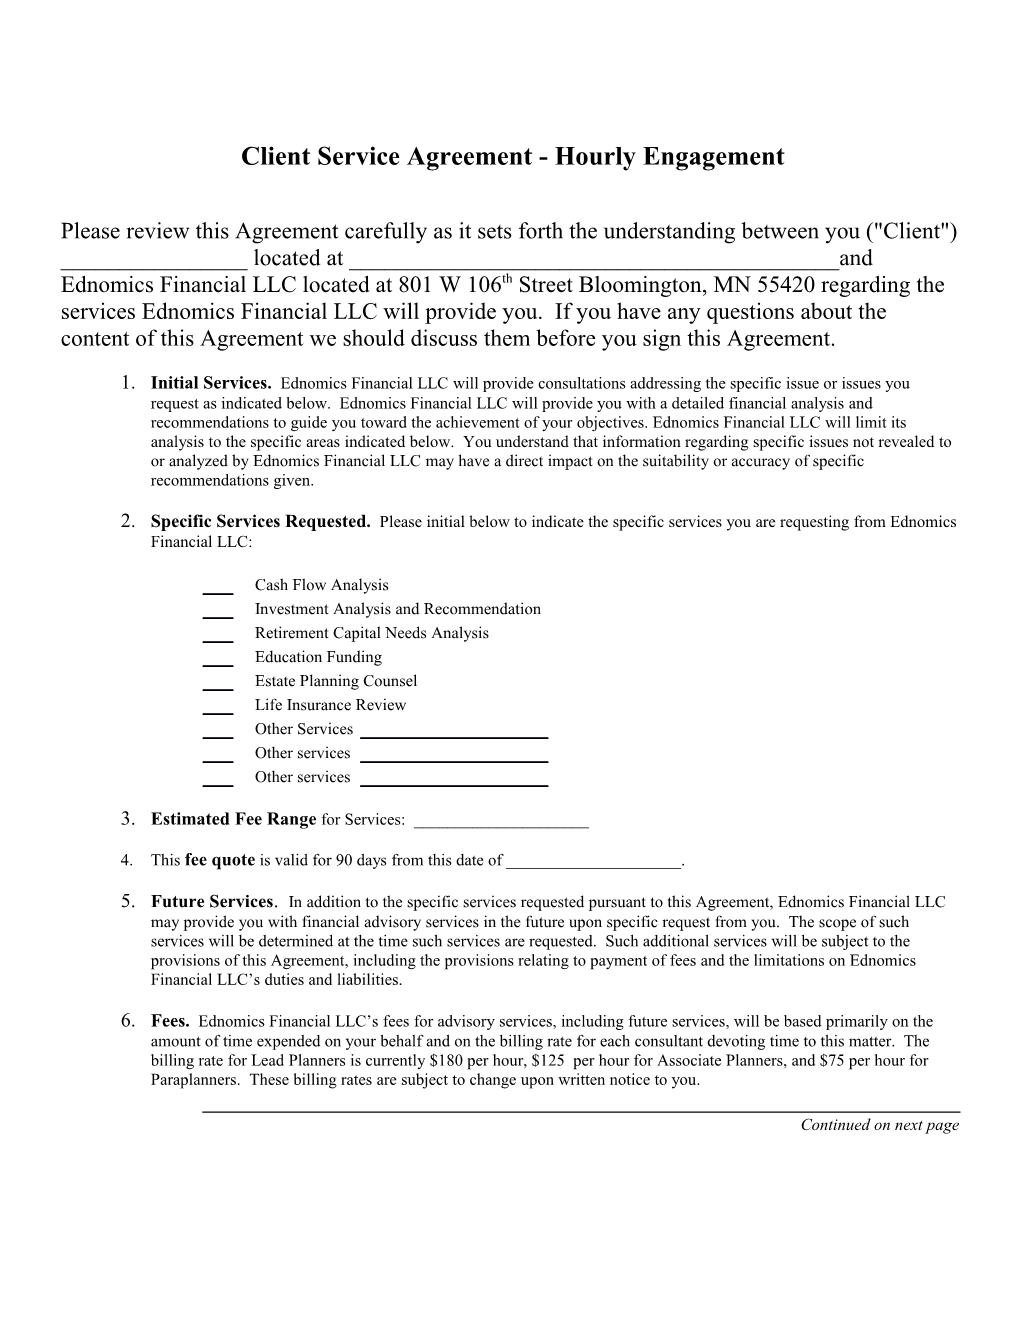 Client Service Agreement - Hourly Engagement